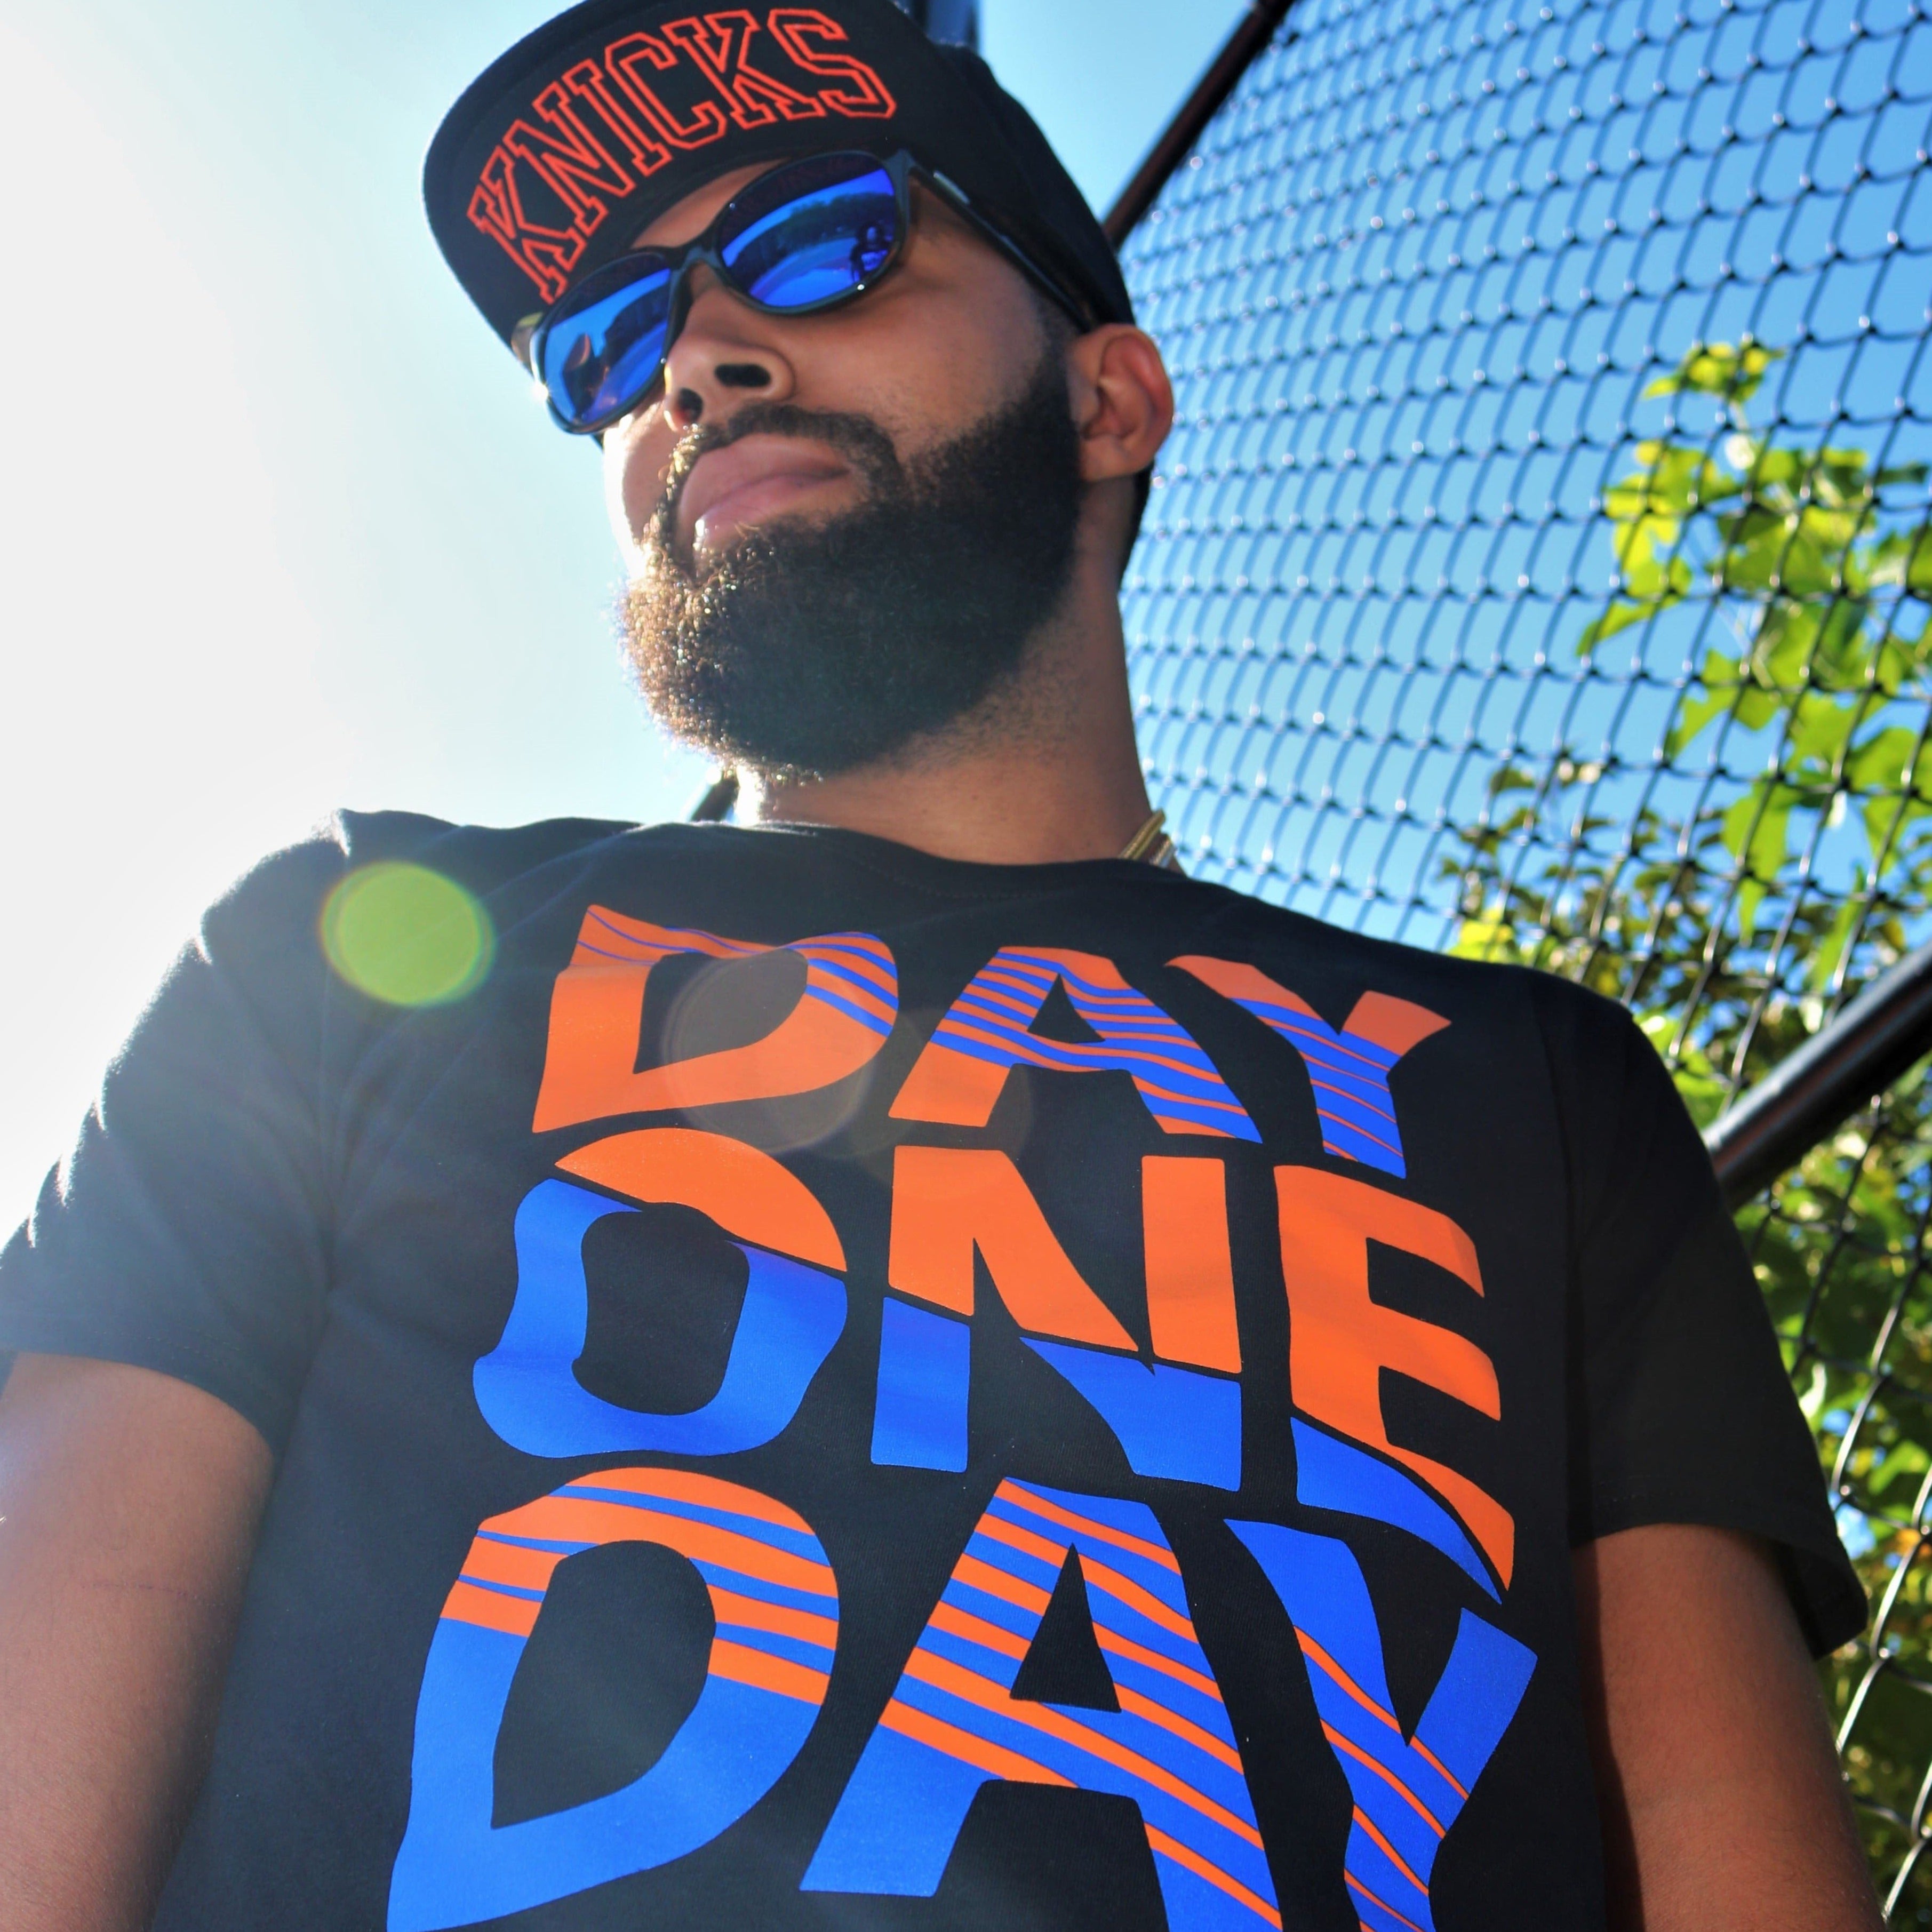 Day One/One Day T-Shirt